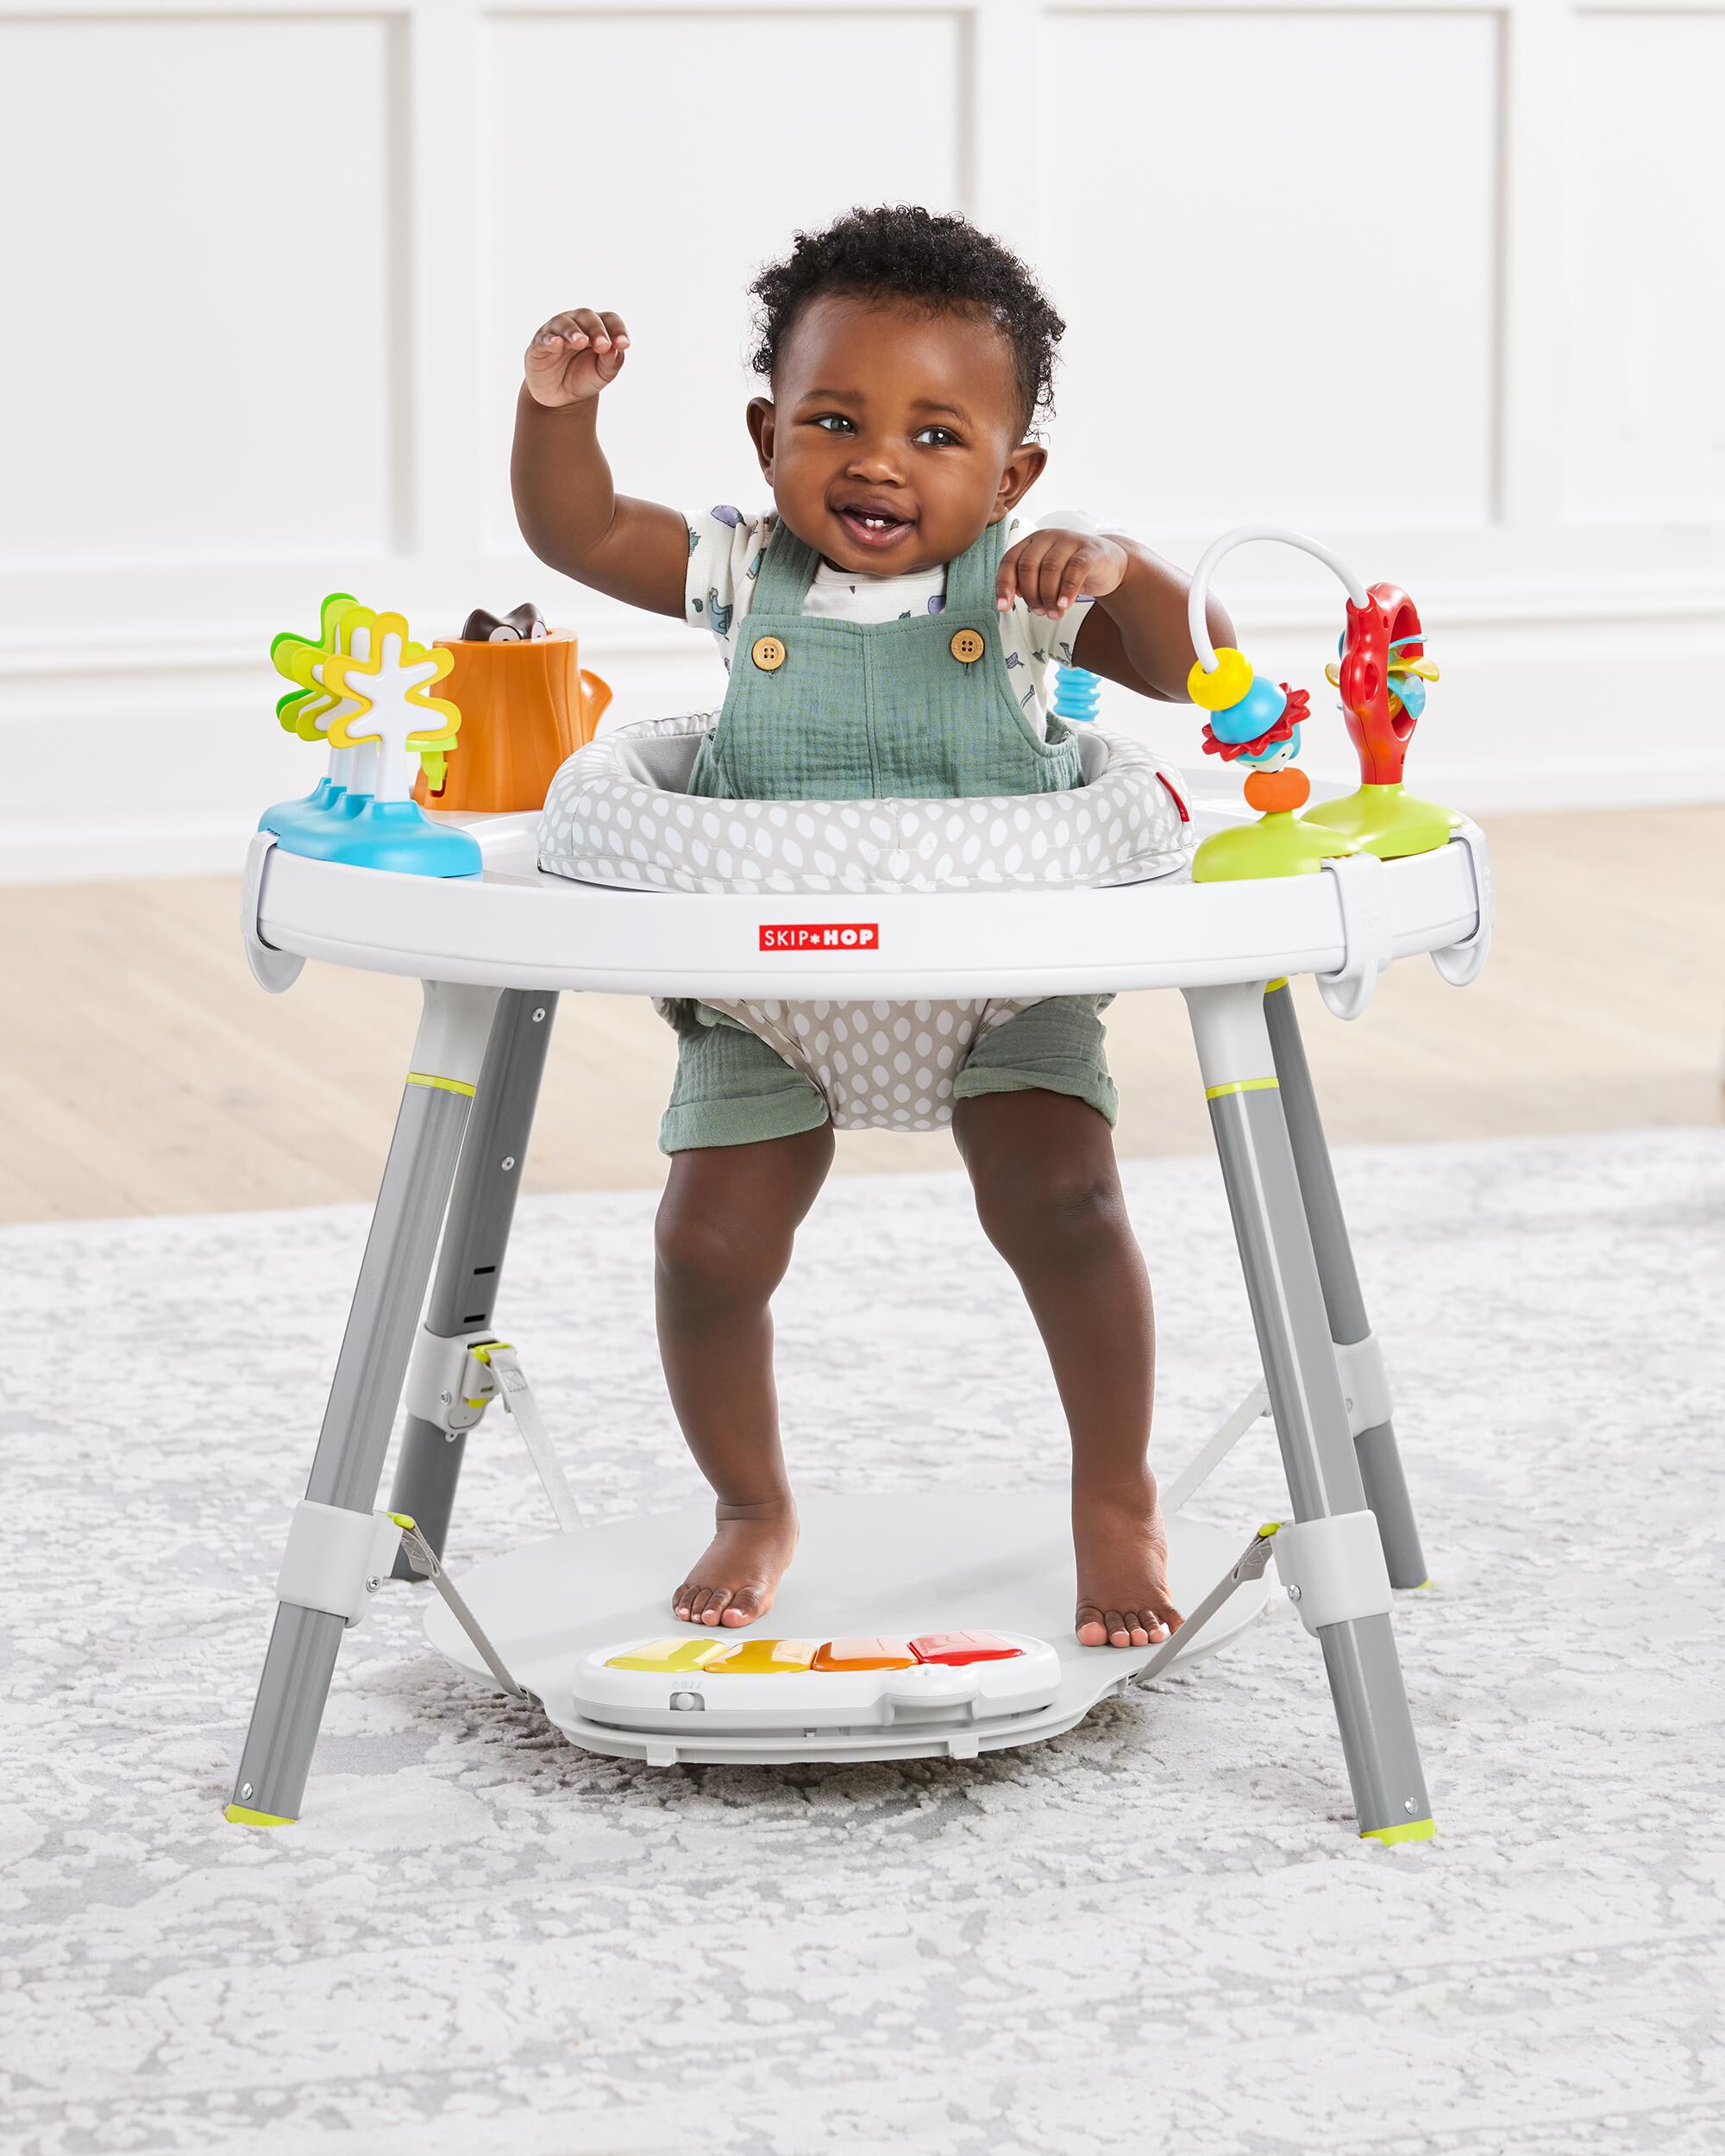 Multi Explore & More Baby's View 3-Stage Activity Center | skiphop.com